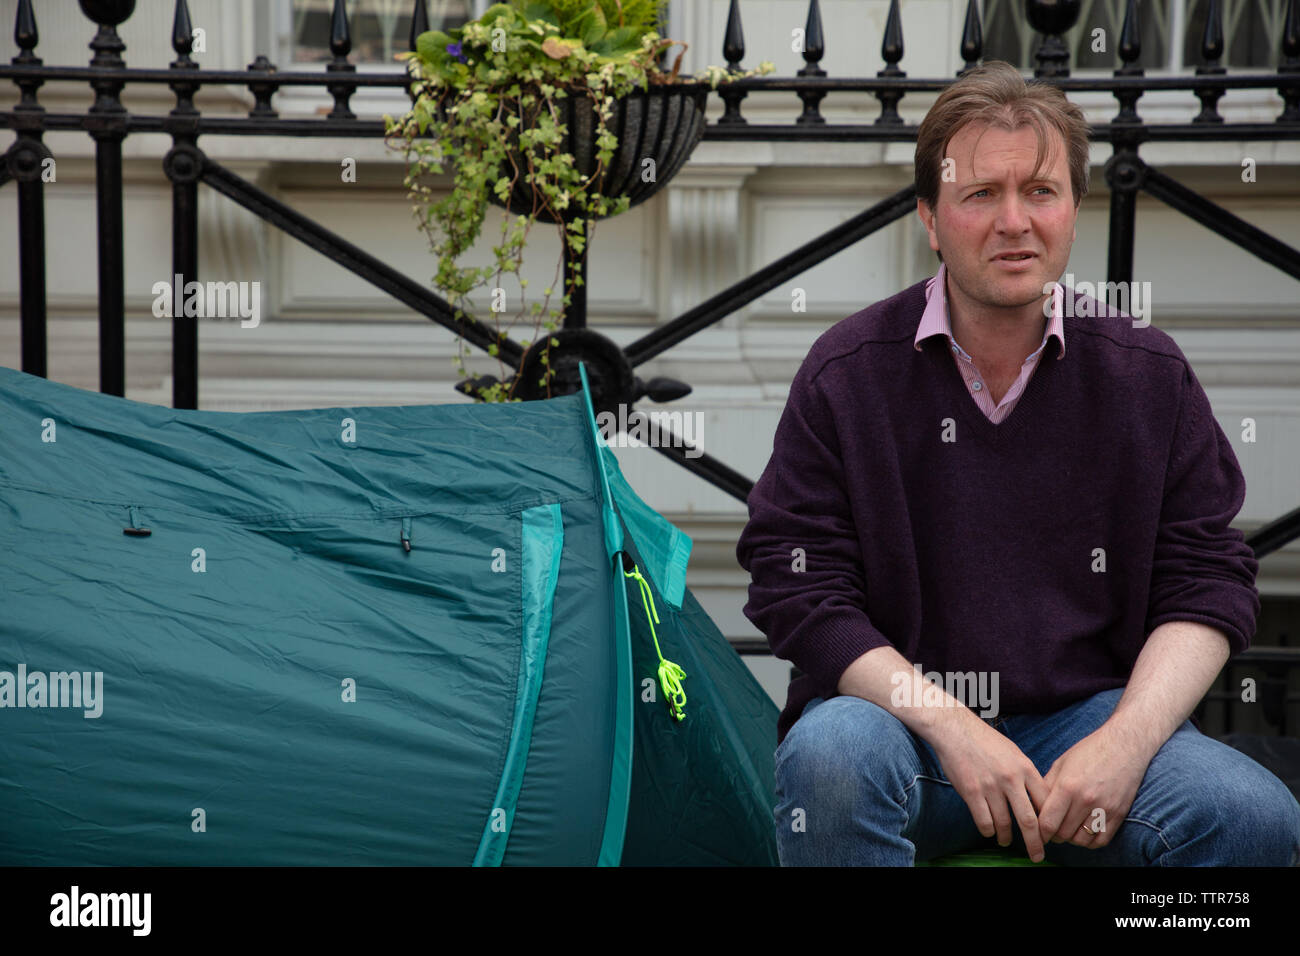 London, UK. 17th June 2019. Richard Ratcliffe on hunger strike in front of the Iranian embassy in London in protest of the detention of his wife Nazanin Zaghari in Iran over spying allegations. Credit: Joe Kuis / Alamy Stock Photo